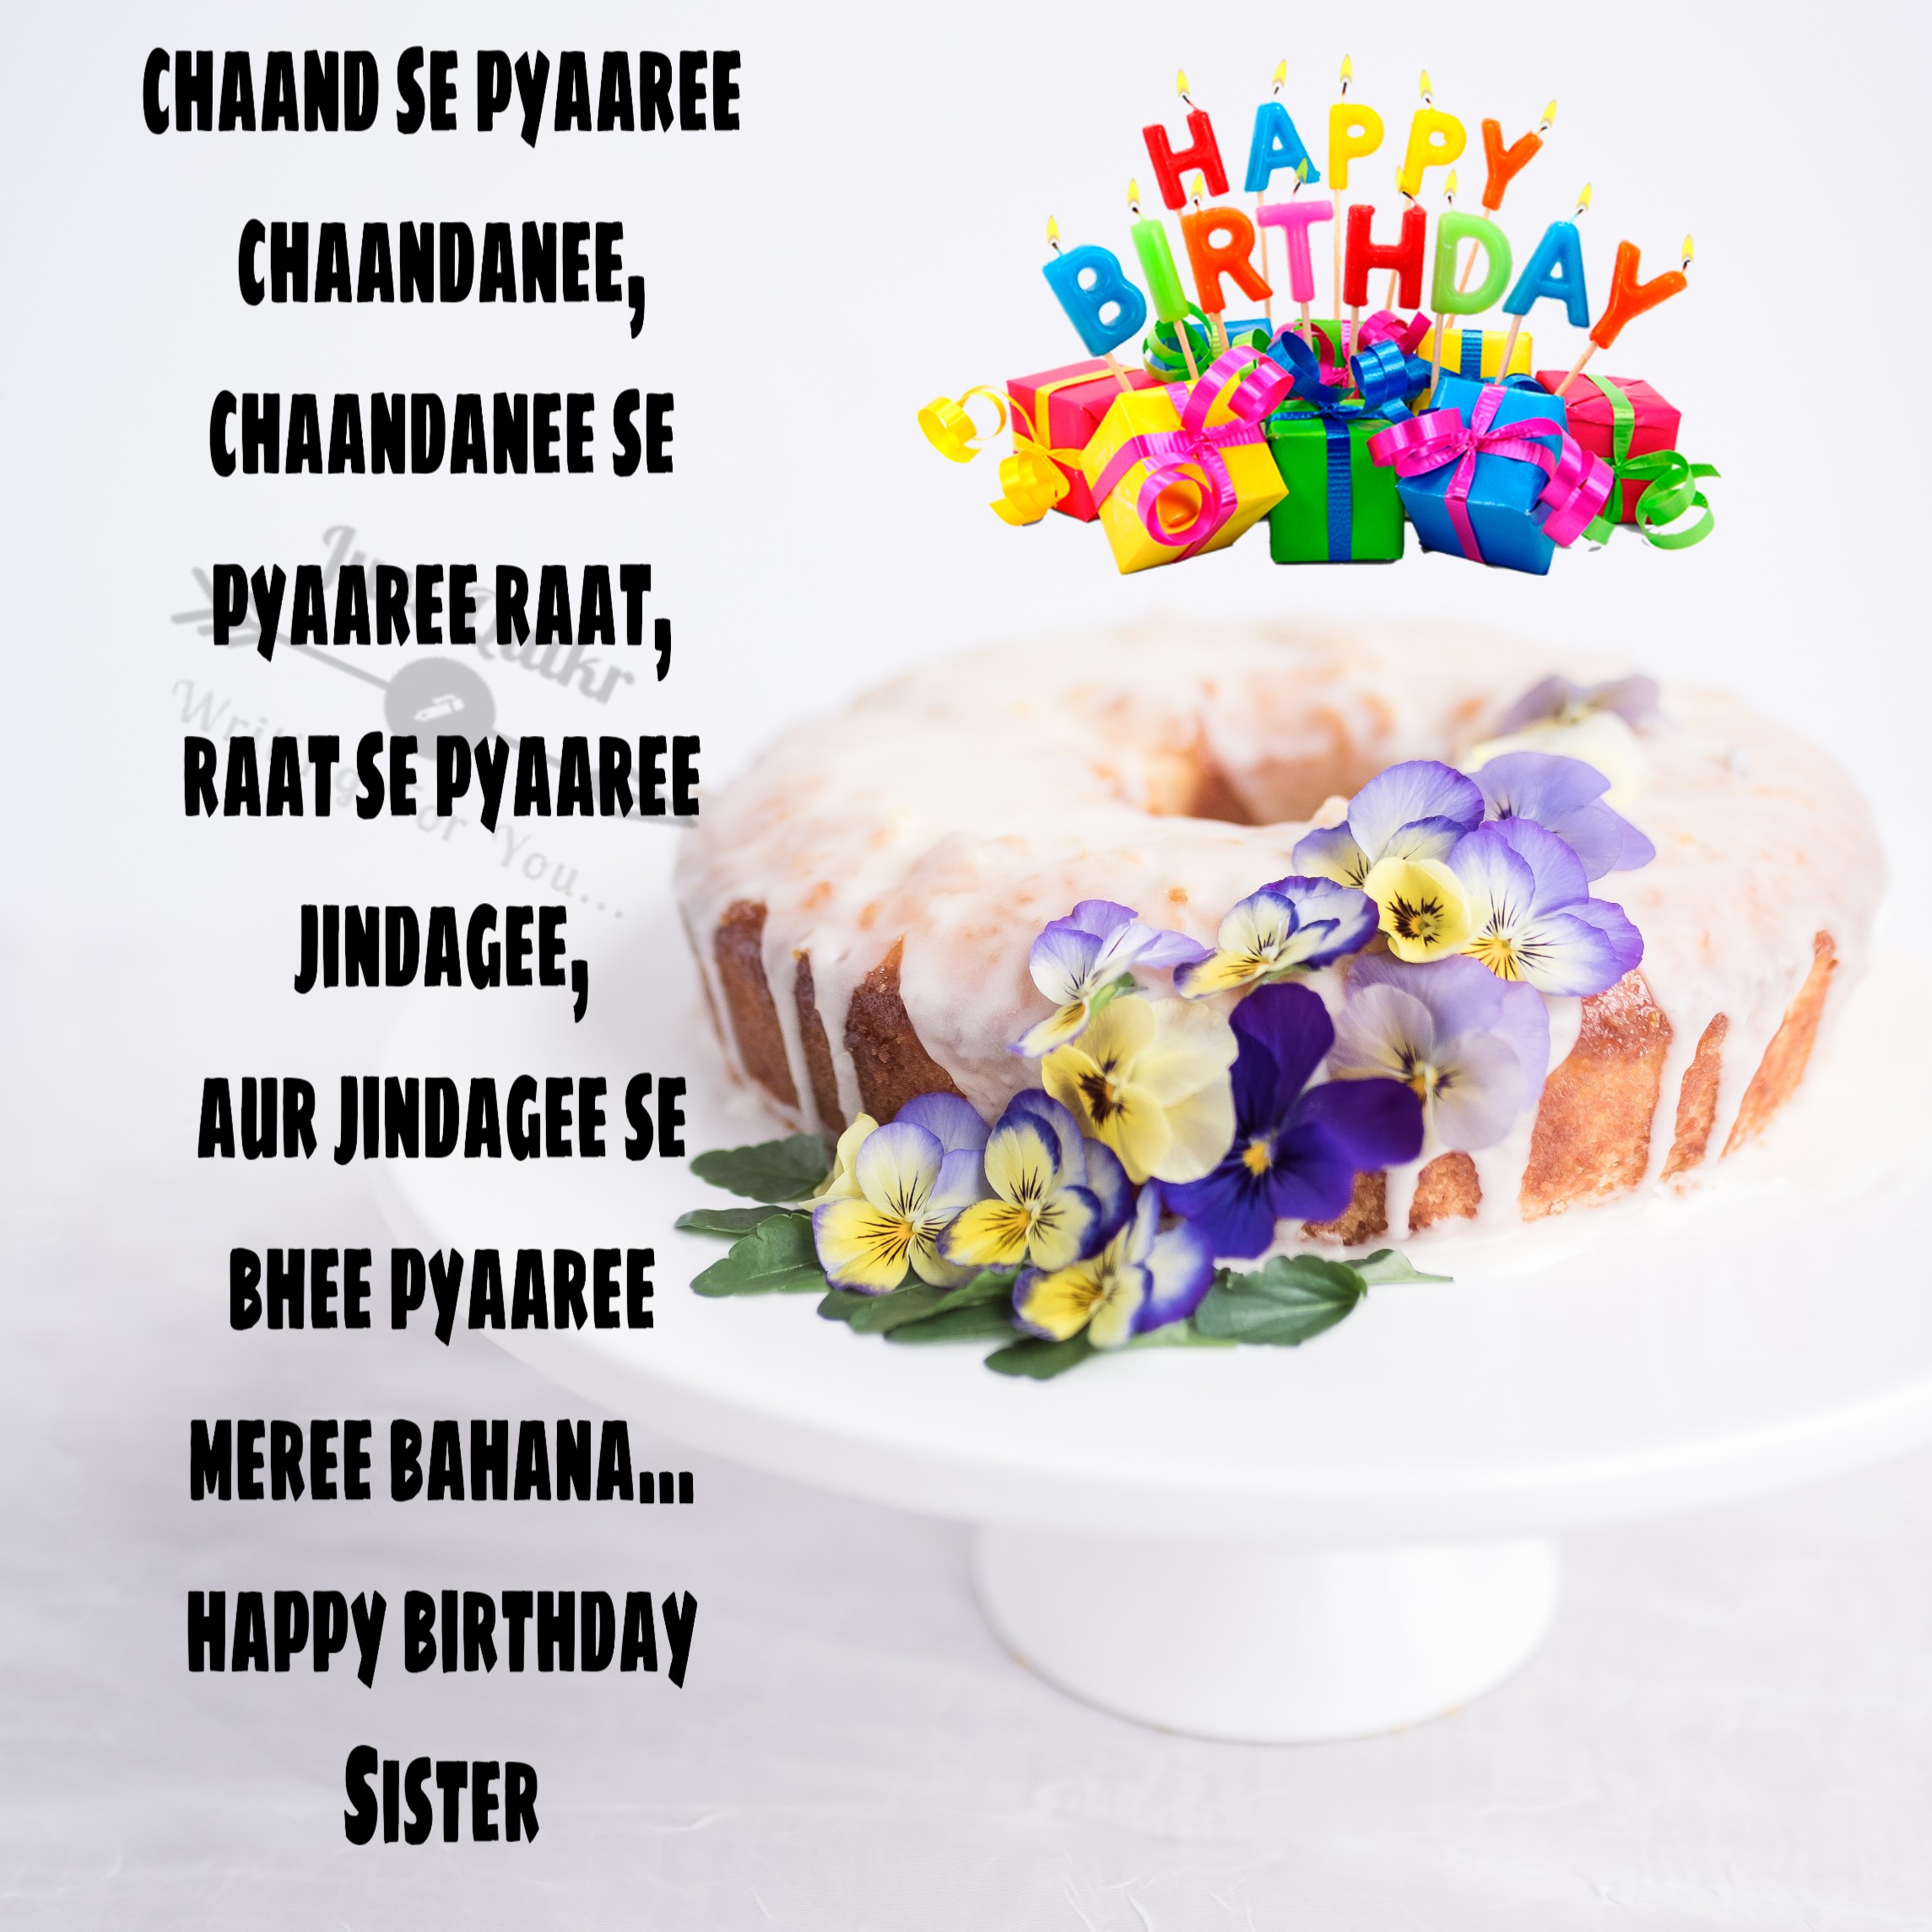 Happy Birthday Cake HD Pics Images with Shayari Sayings for Cousin Sister